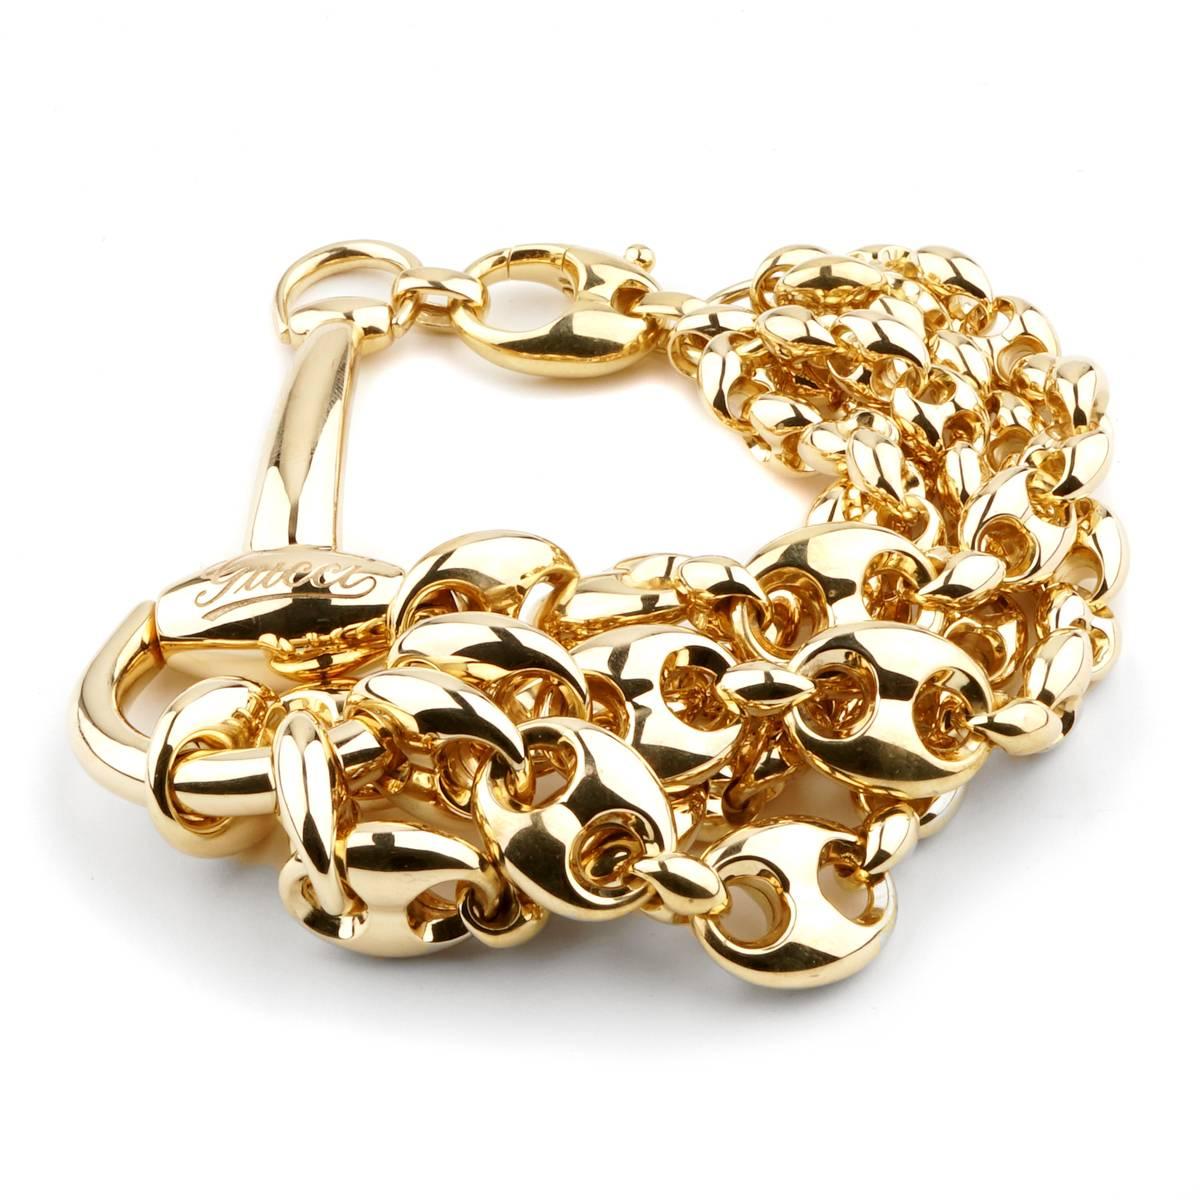 A magnificent Gucci bracelet featuring a Horsebit motif attaching 5 cascading Gucci link yellow gold bracelets crafted in 18k yellow gold. Length: 8